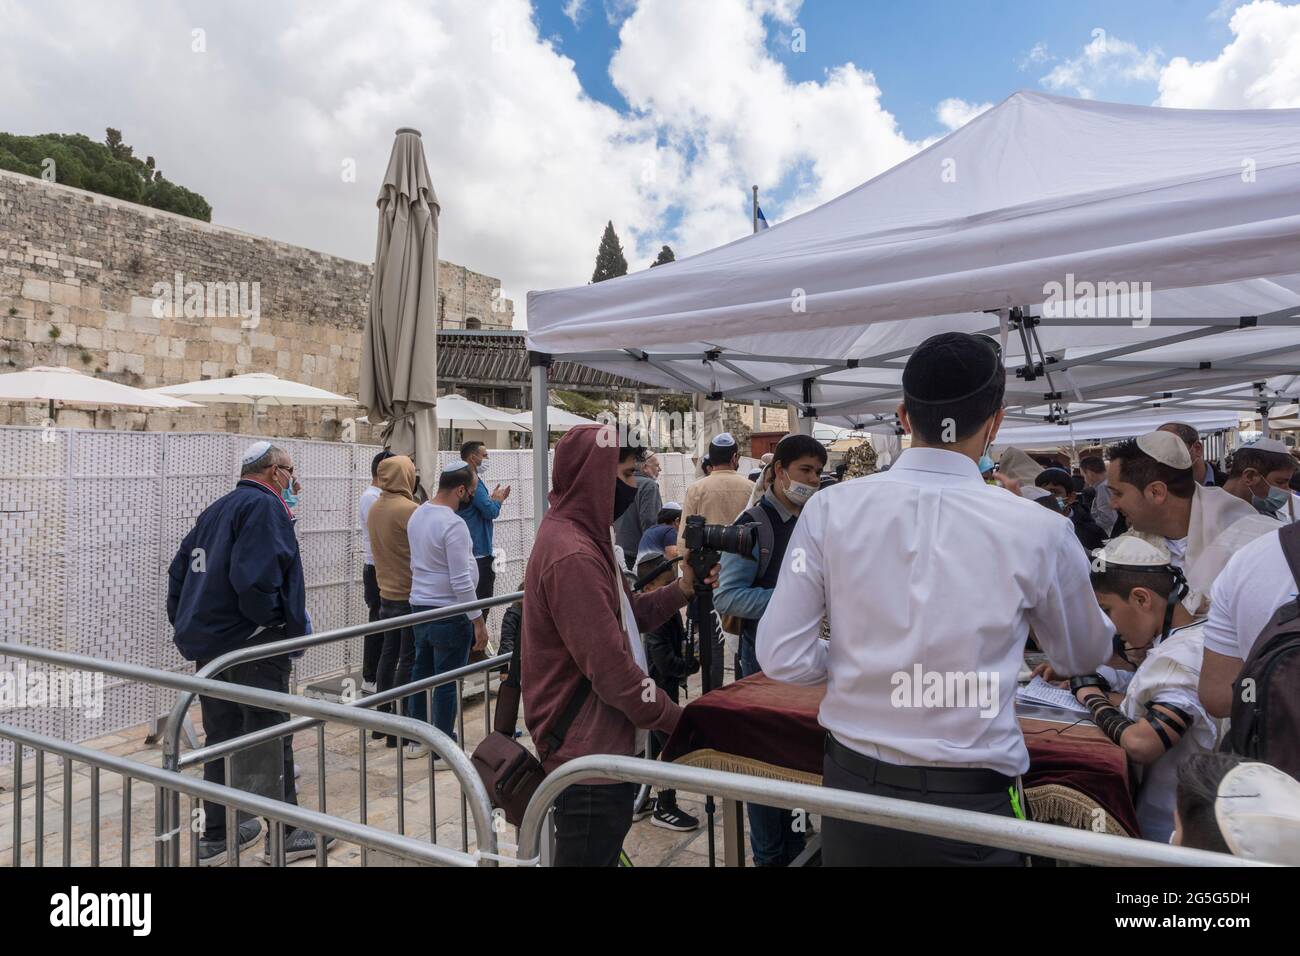 Jerusalem, Israel. A bar Mitzvah ceremony at the Western Wall, one of the holliest places for Judaism, during the COVID pandemic. The area was equipped with barriers and dividers to seperate people praying and keep a measure of social distancing. Stock Photo